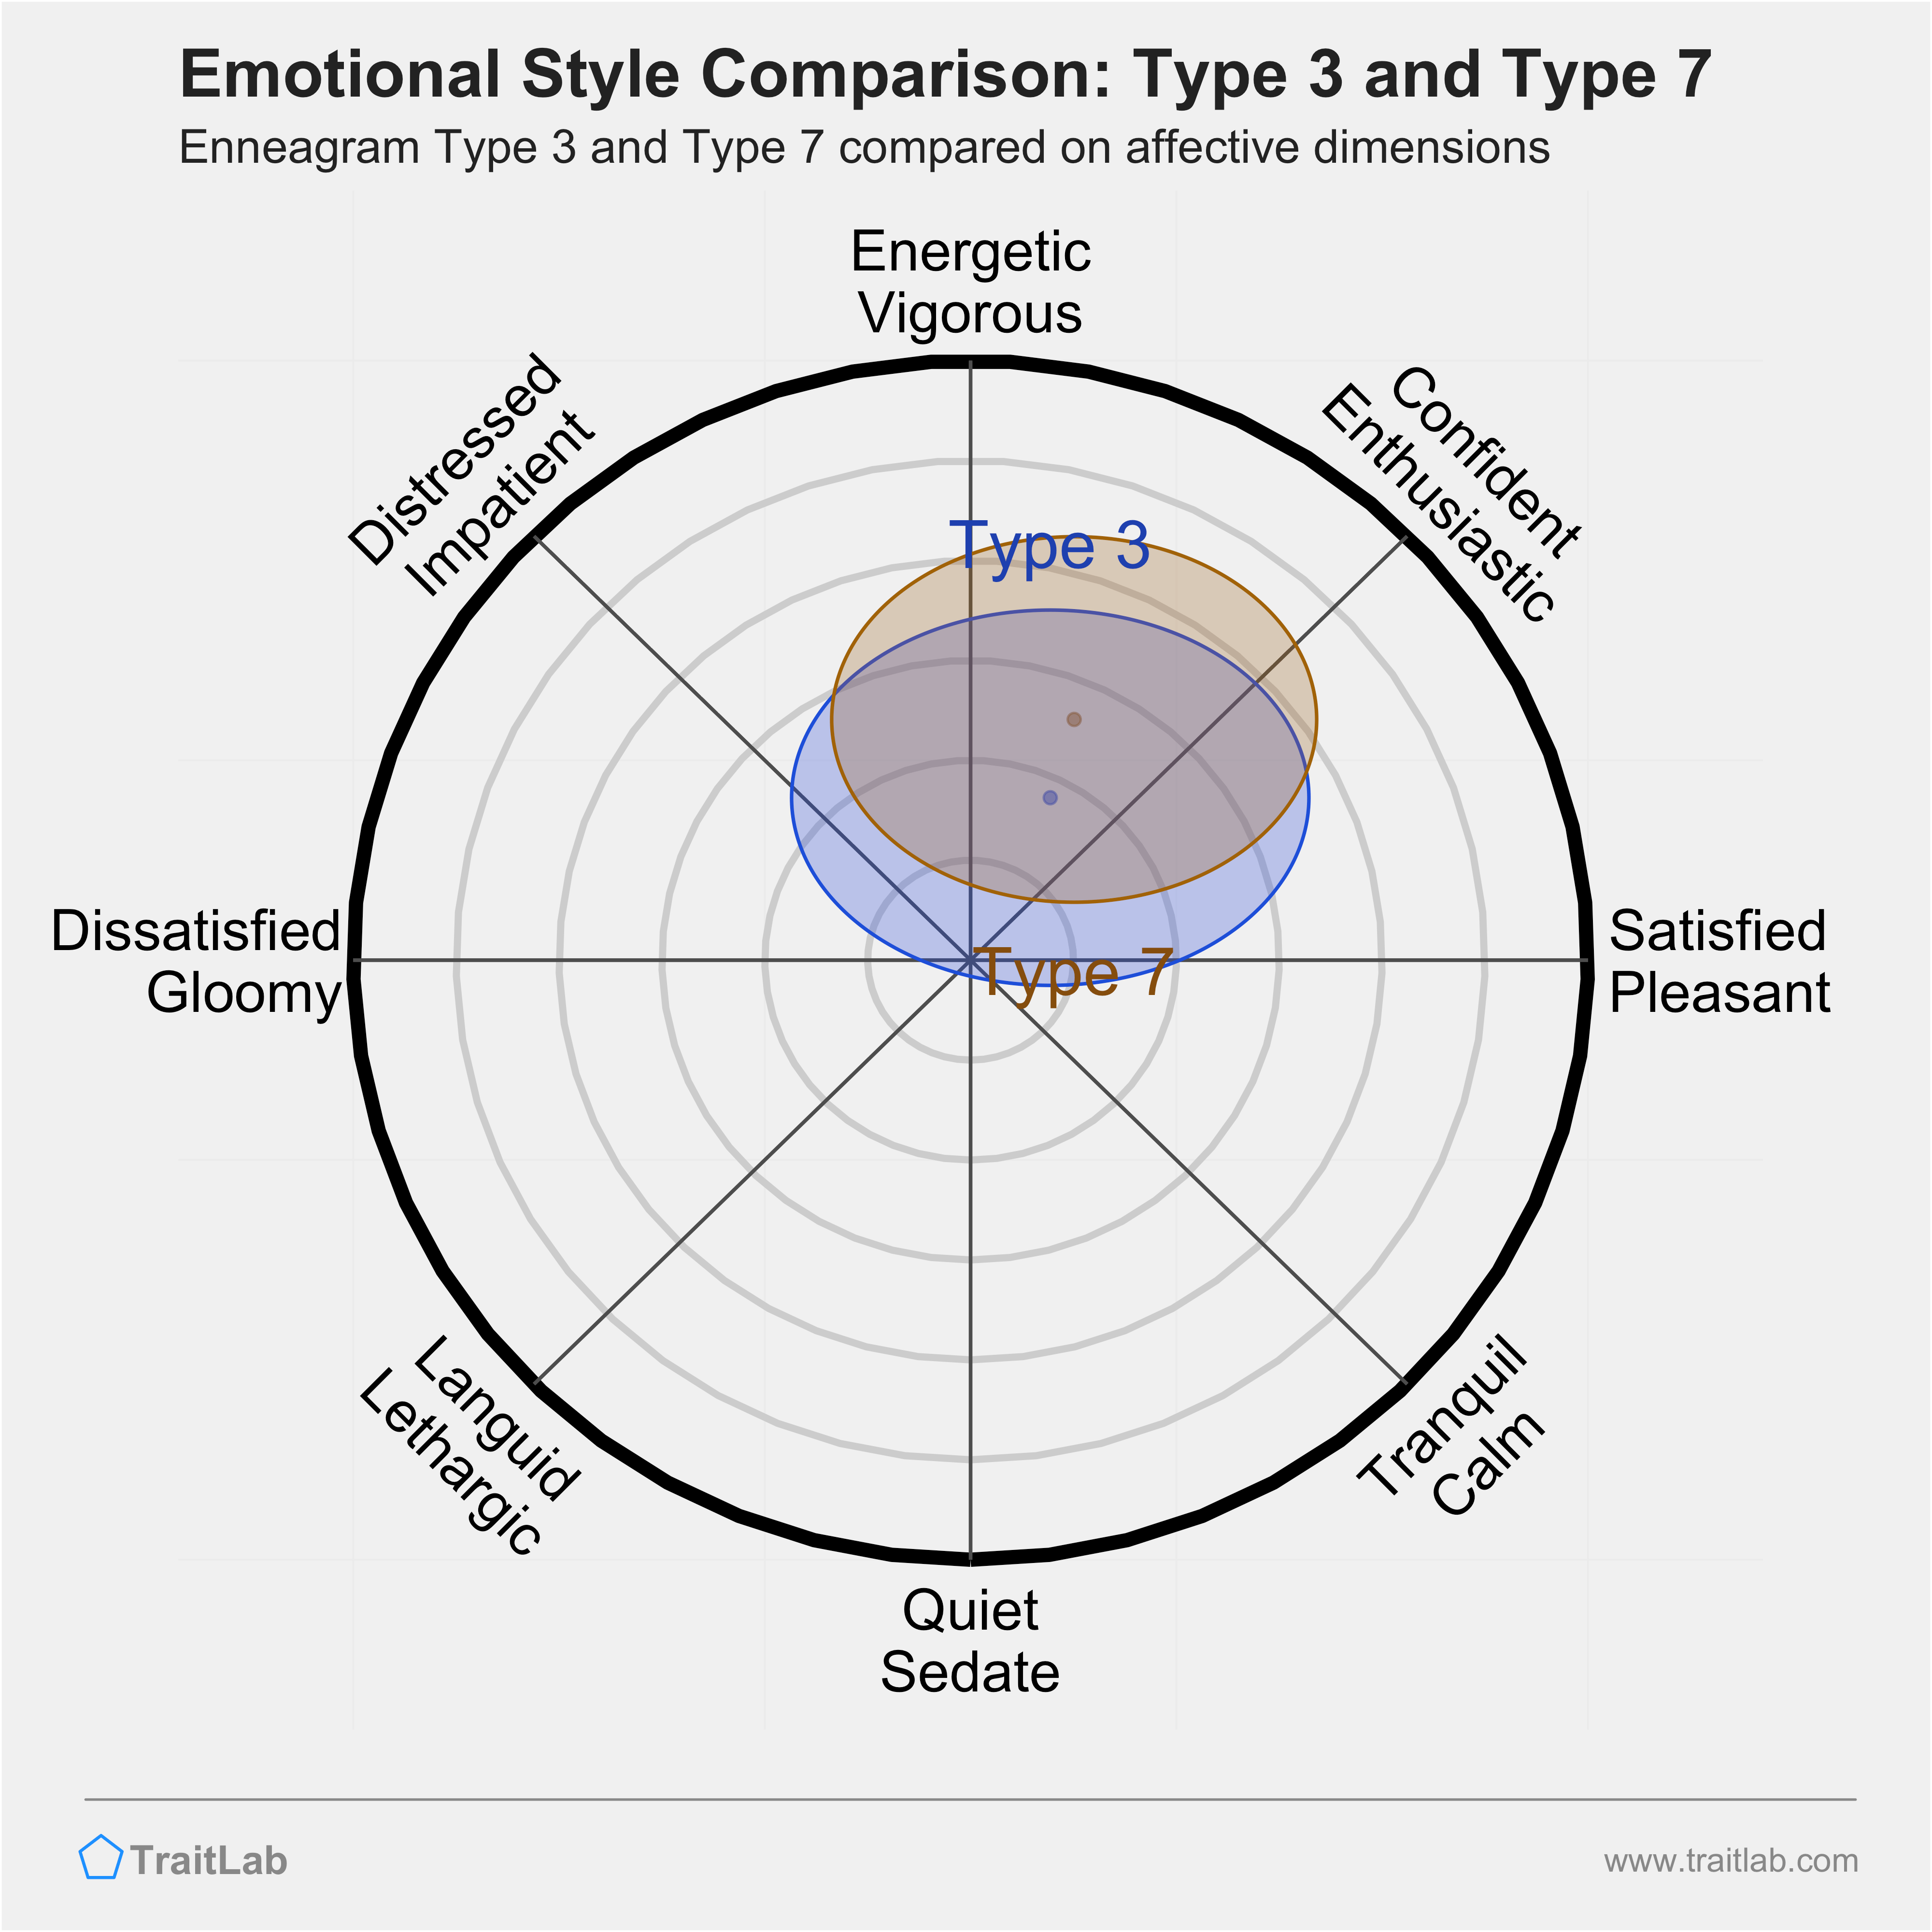 Type 3 and Type 7 comparison across emotional (affective) dimensions